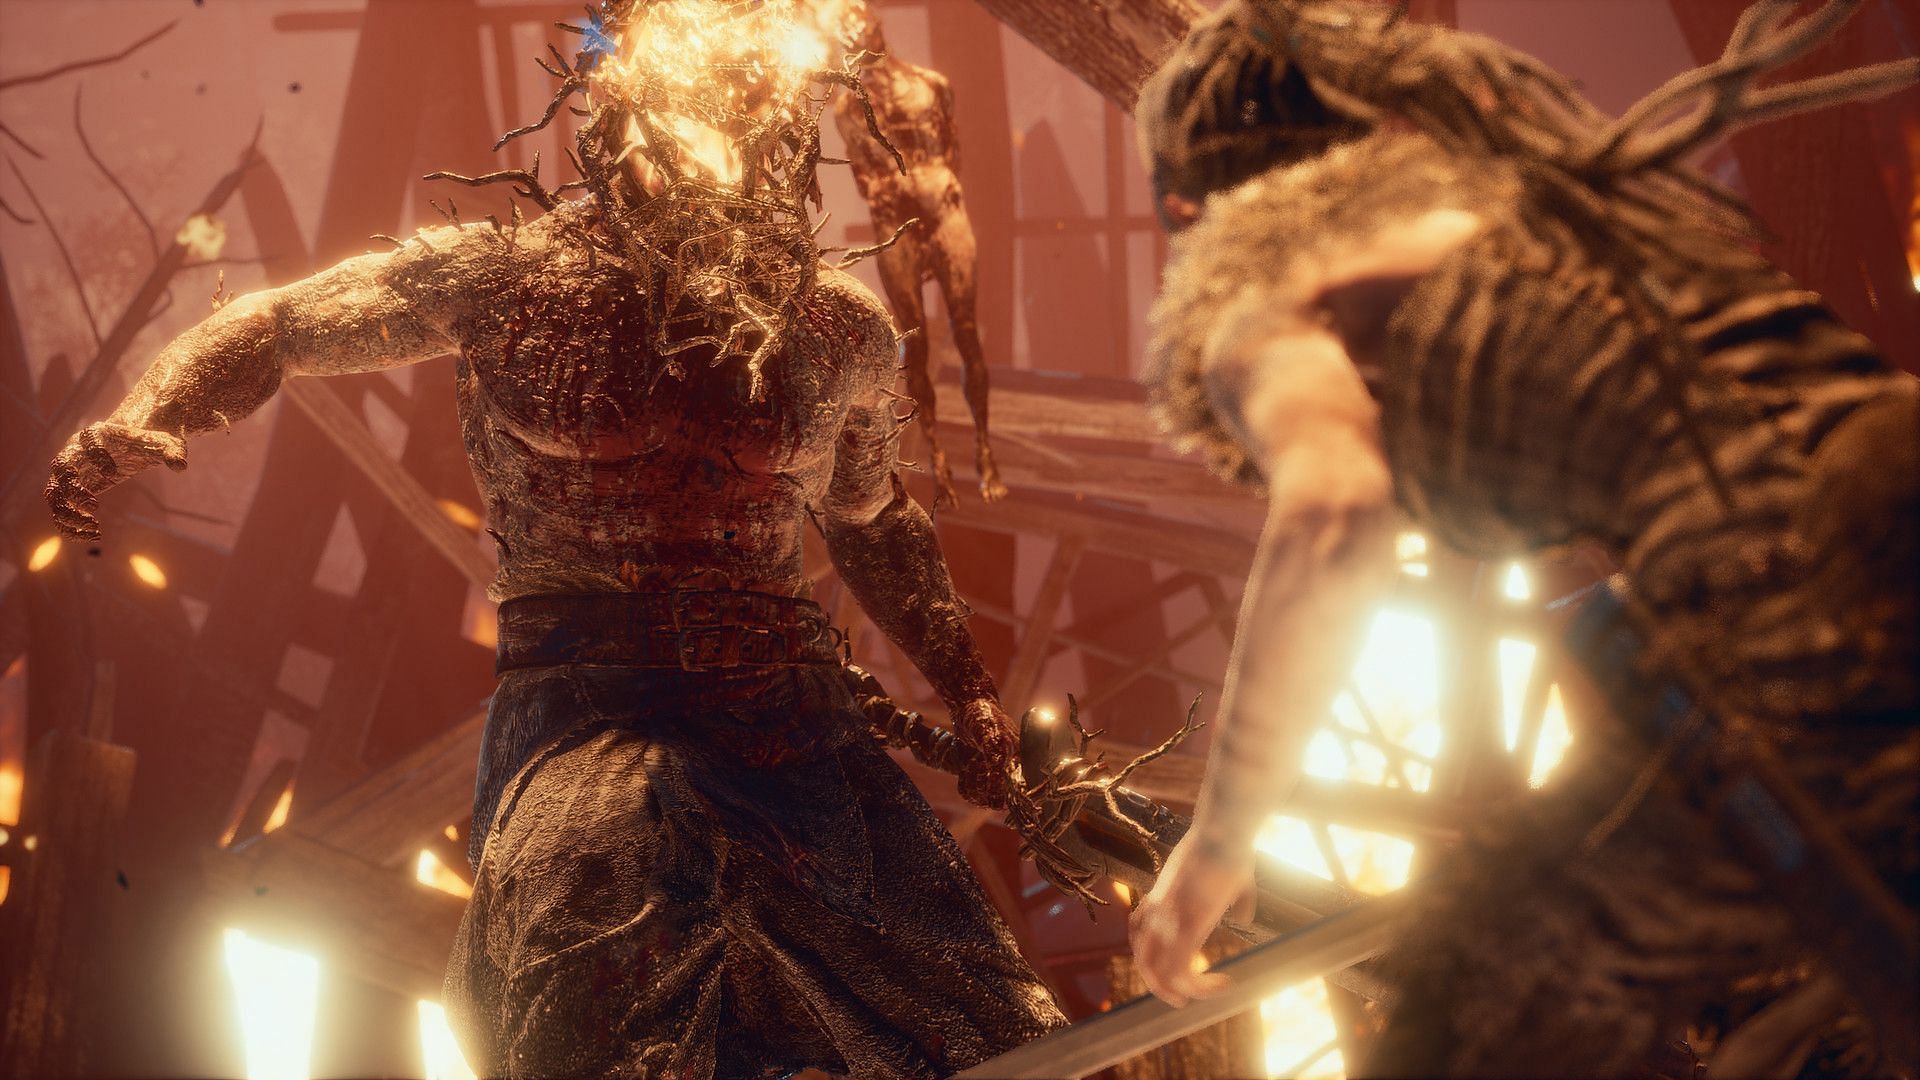 Go into a journey to hell in Hellblade (Image via Ninja Theory)